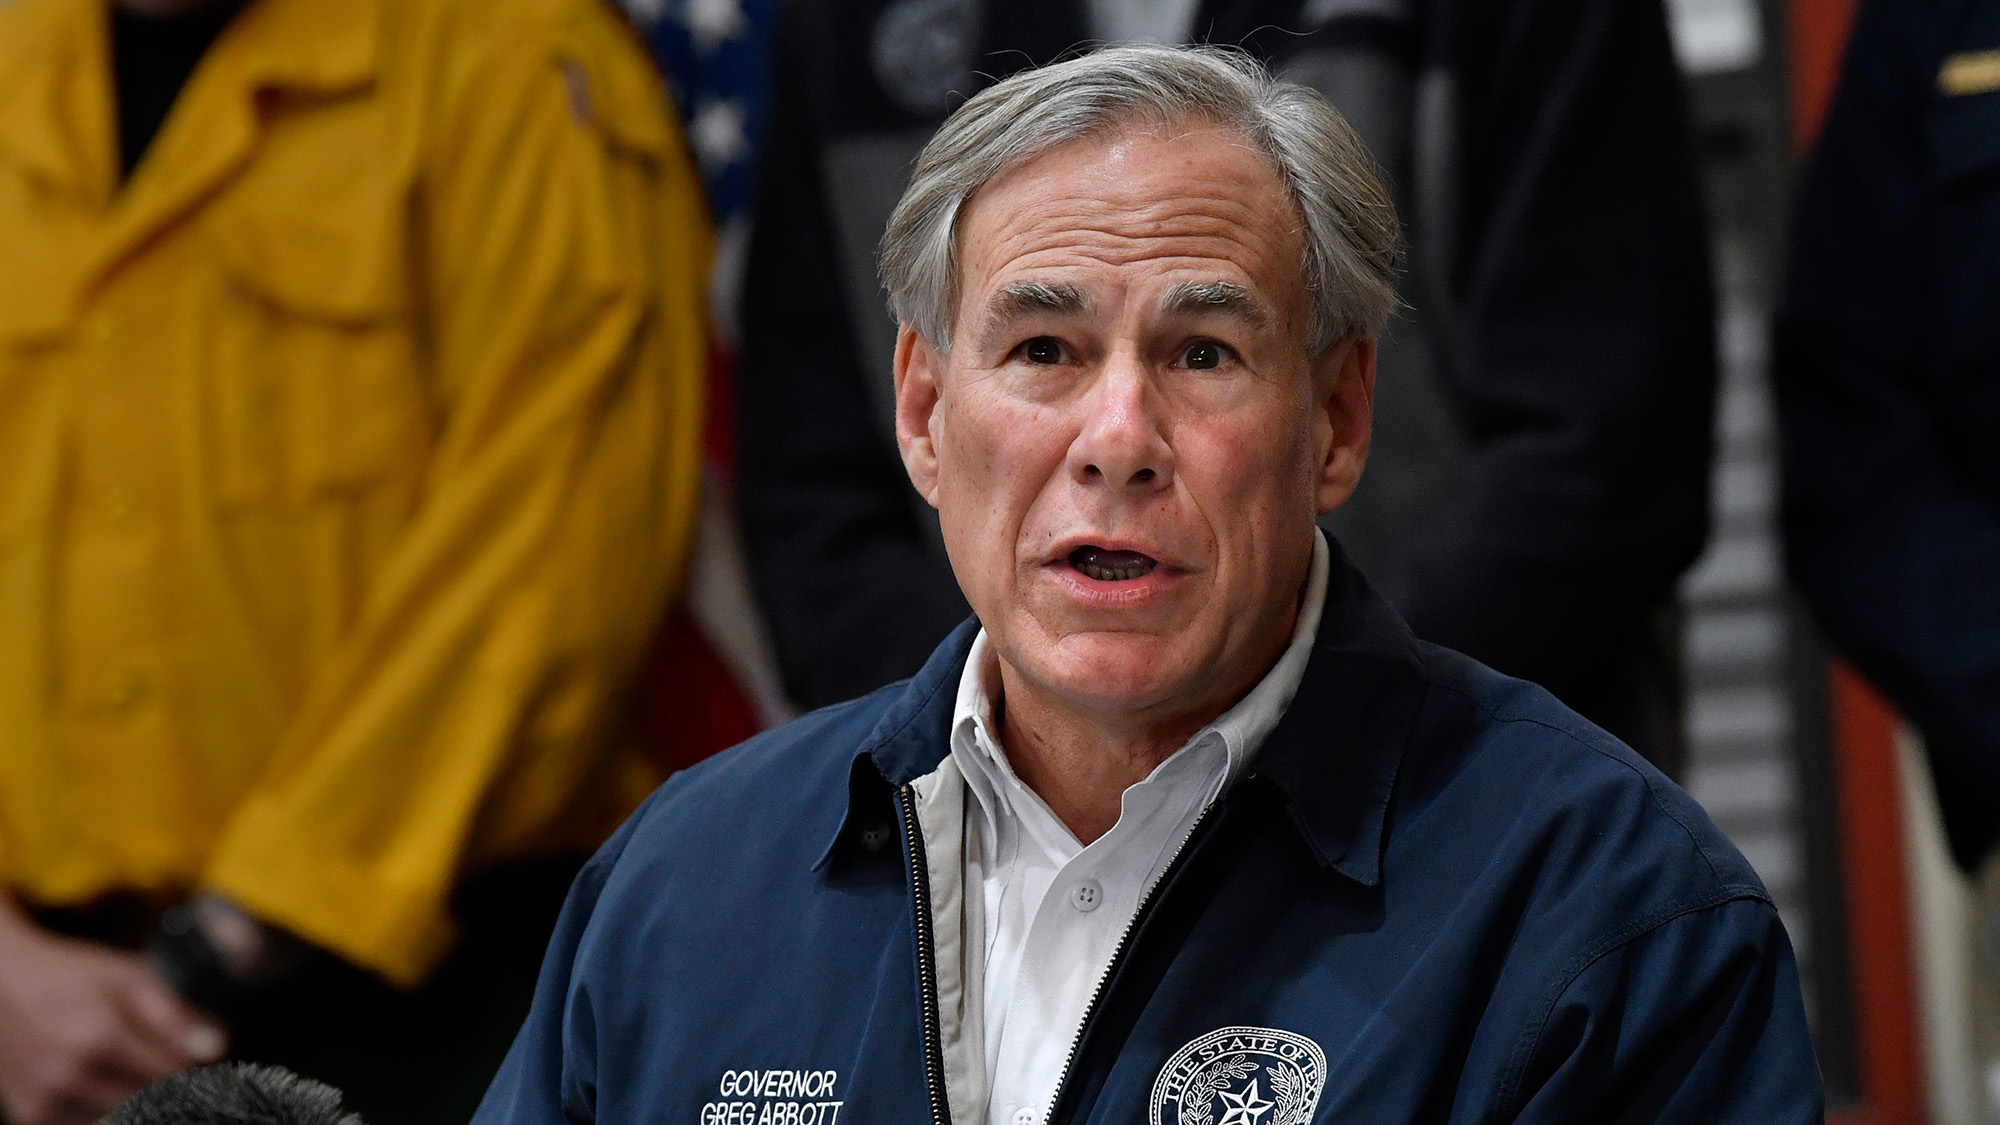 Texas Gov. Greg Abbott speaks during a recent press conference in the Eastland Fire Department in Abilene, Texas on Friday March 18.